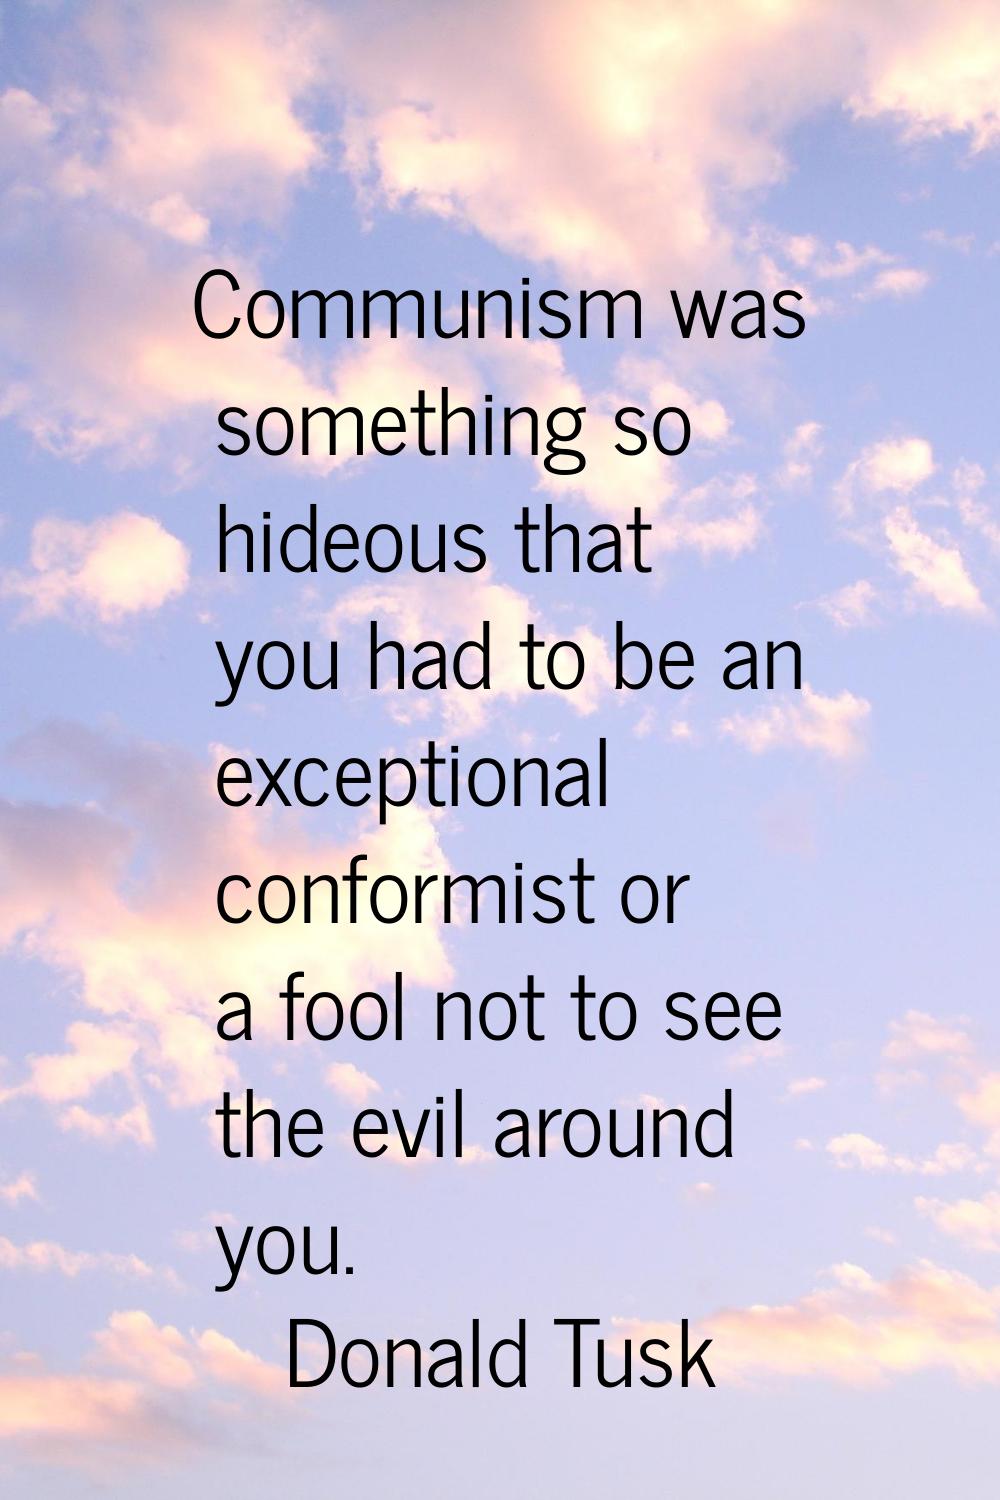 Communism was something so hideous that you had to be an exceptional conformist or a fool not to se